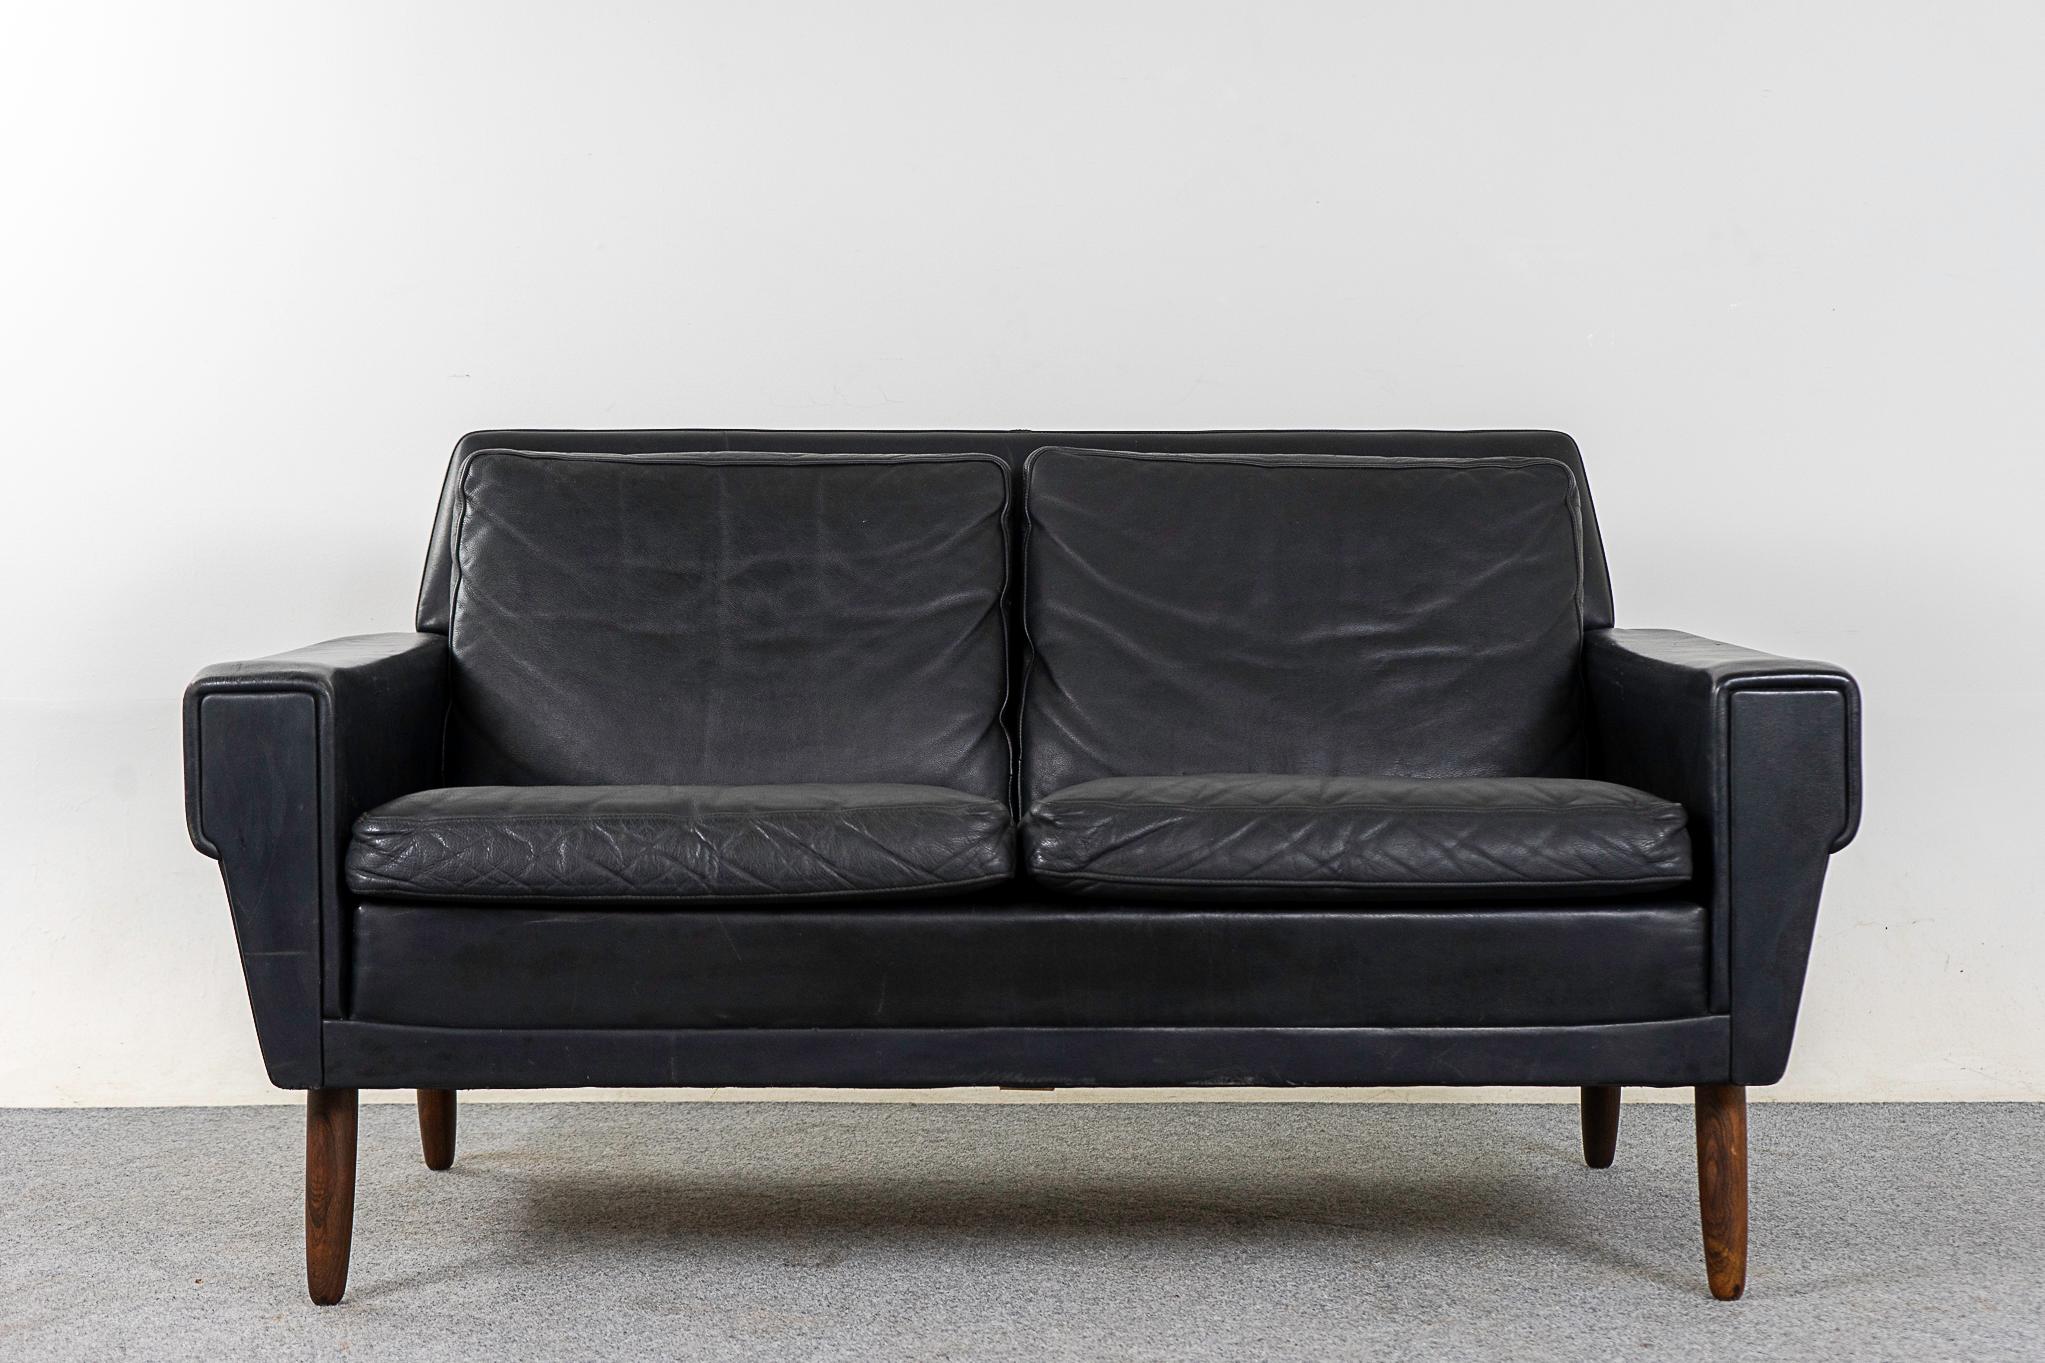 Leather and rosewood Danish loveseat, circa 1960's. Sultury andles on thi charming lover. Original black leather upholstery with nice patina. Solid splayed tapering rosewood legs.  Some wear and tear, as shown in photos.

Please inquire for remote